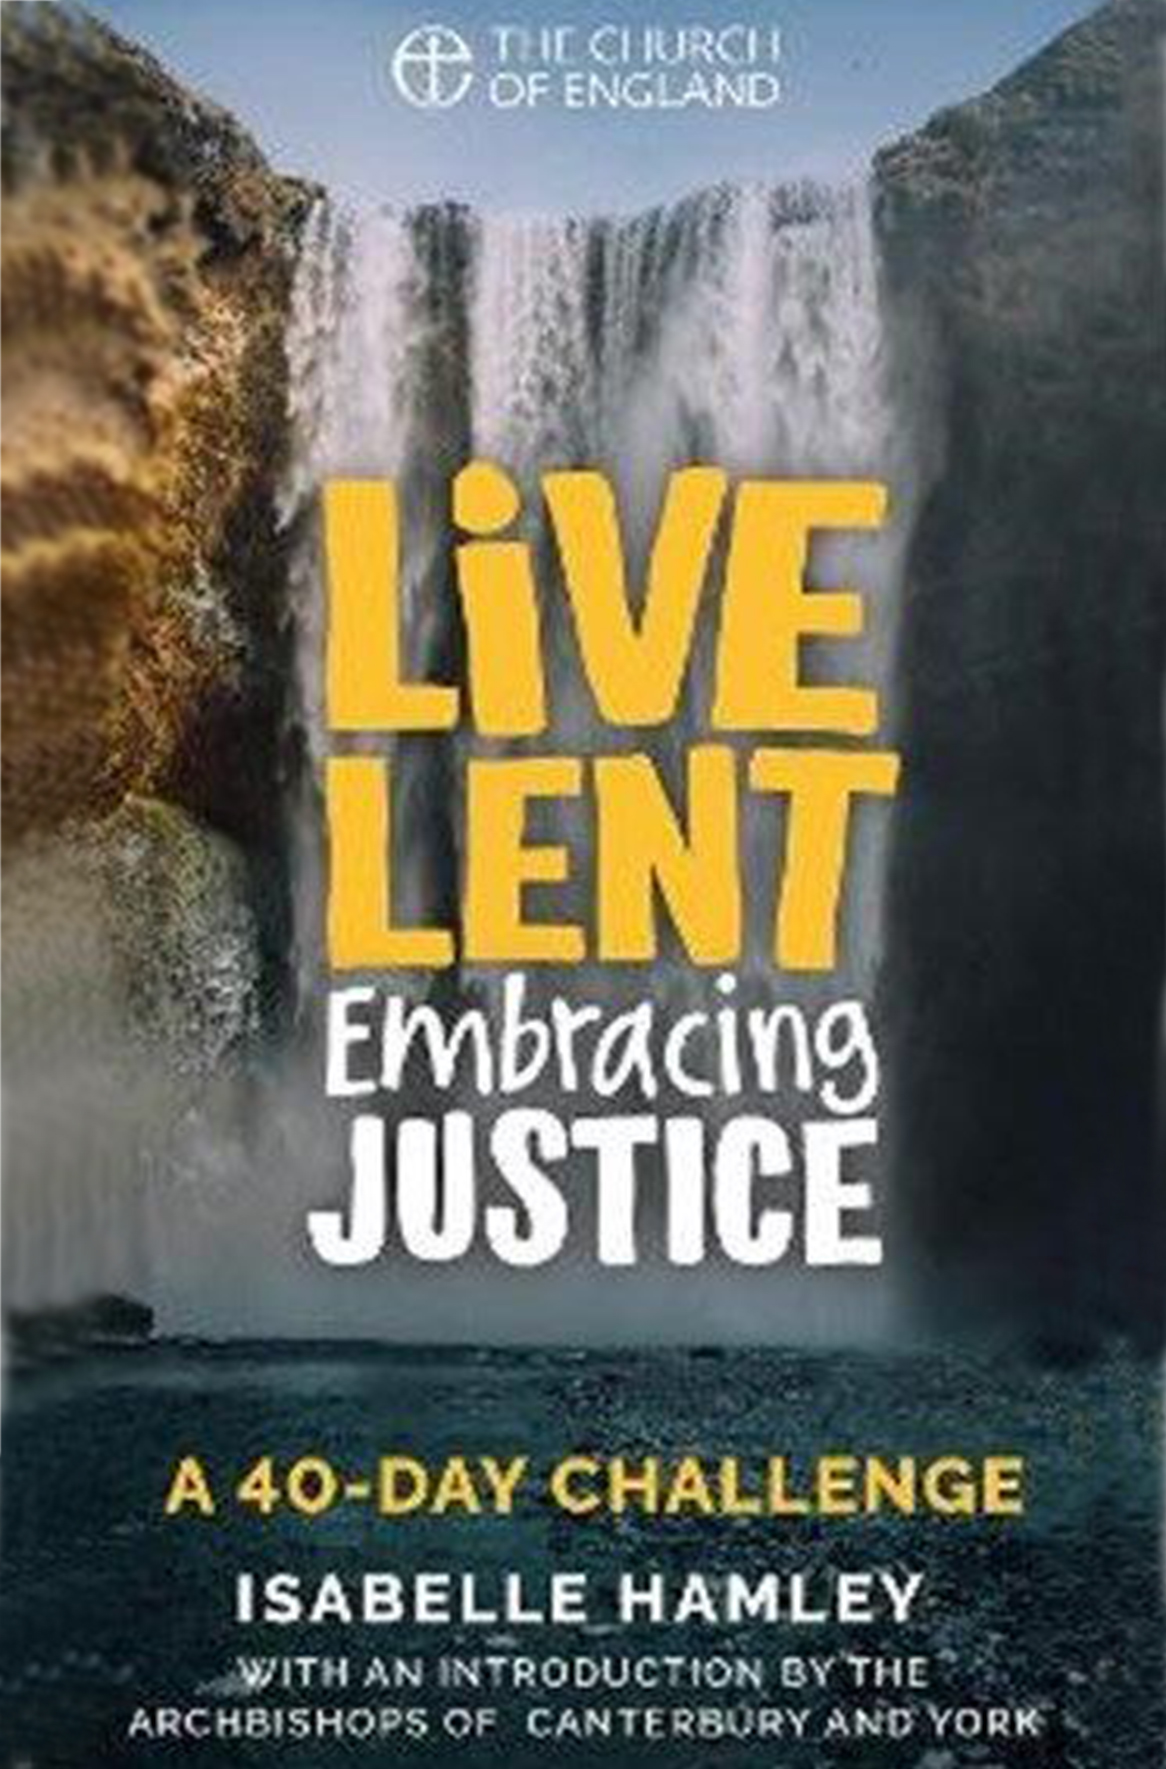 Live Lent. Embracing Justice: a 40-day challenge